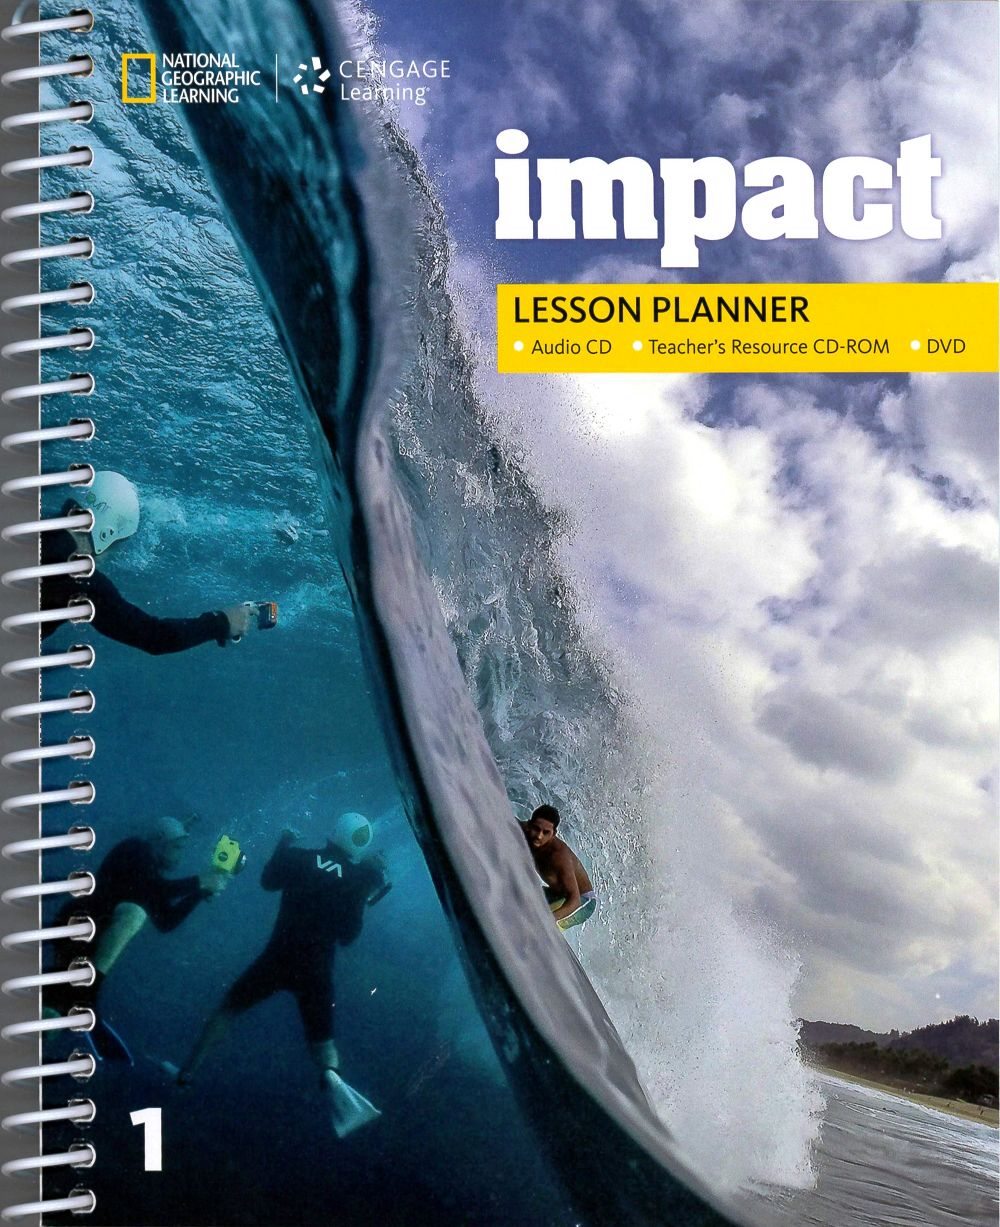 Impact (1) Lesson Planner with MP3 Audio CD/1片, Teacher Resource CD-ROM/1片, and DVD/1片